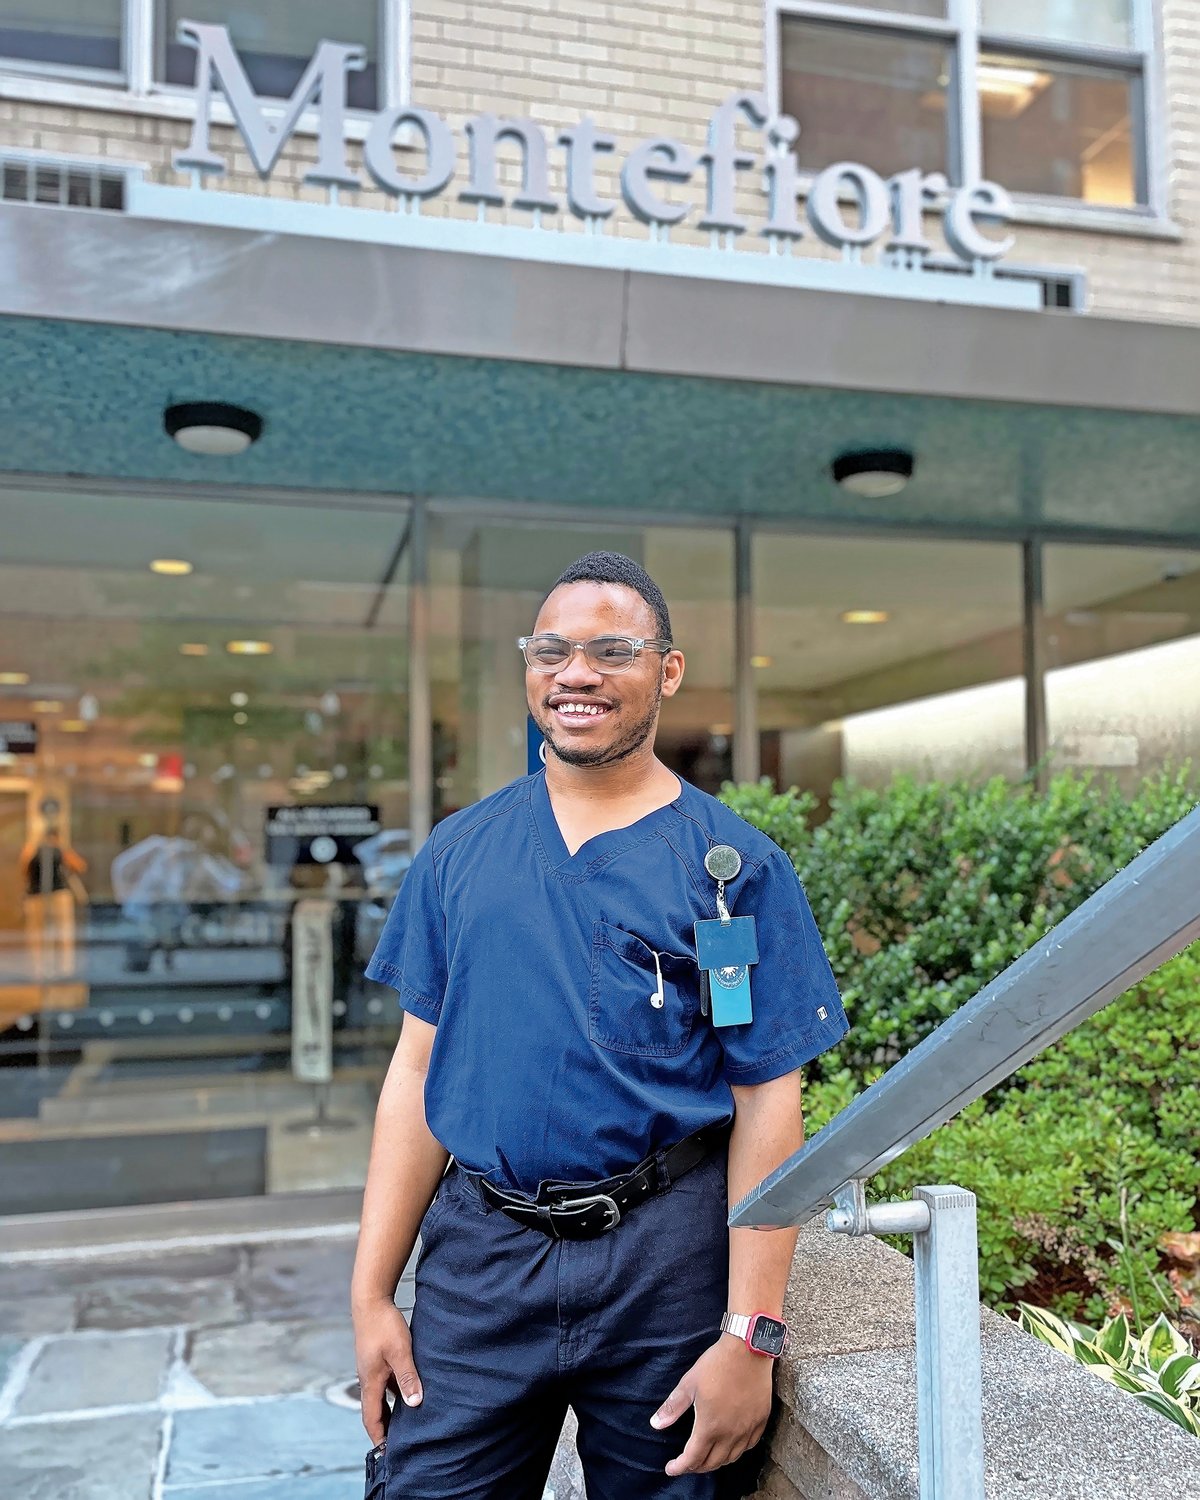 Renard Perksin, an alumnus of Project Search at Montefiore Medical Center, found a job through the program.